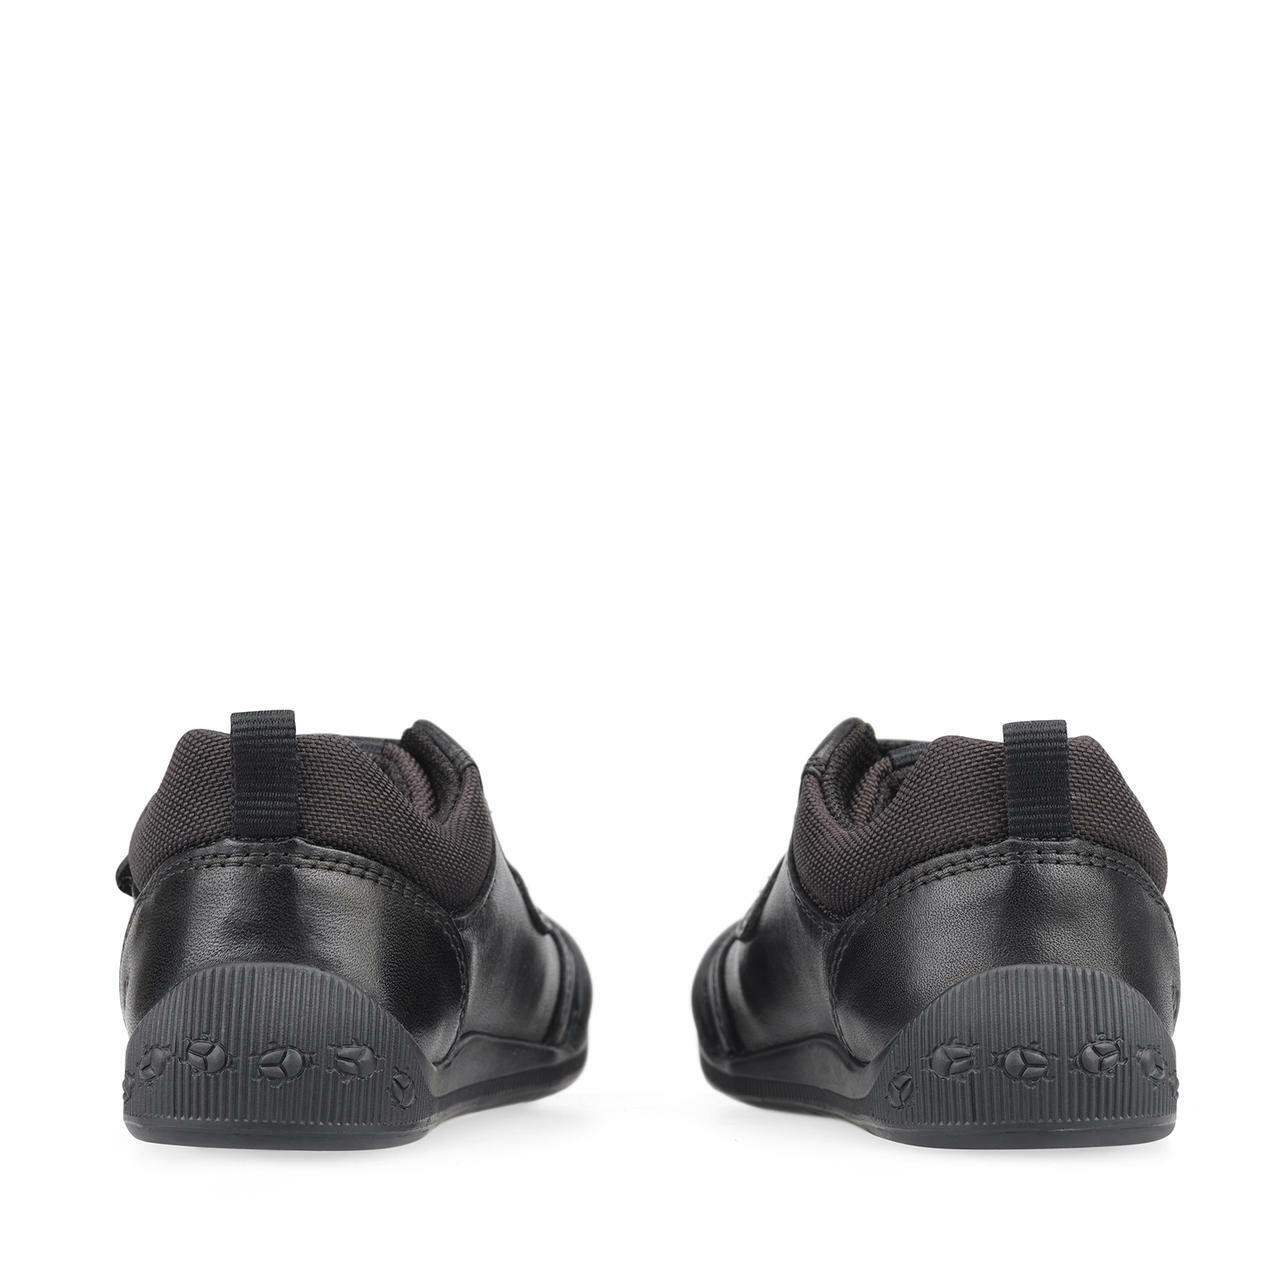 A pair of boys pre school shoes by Start Rite,style Tickle, in black leather with double velcro fastening. Back view.